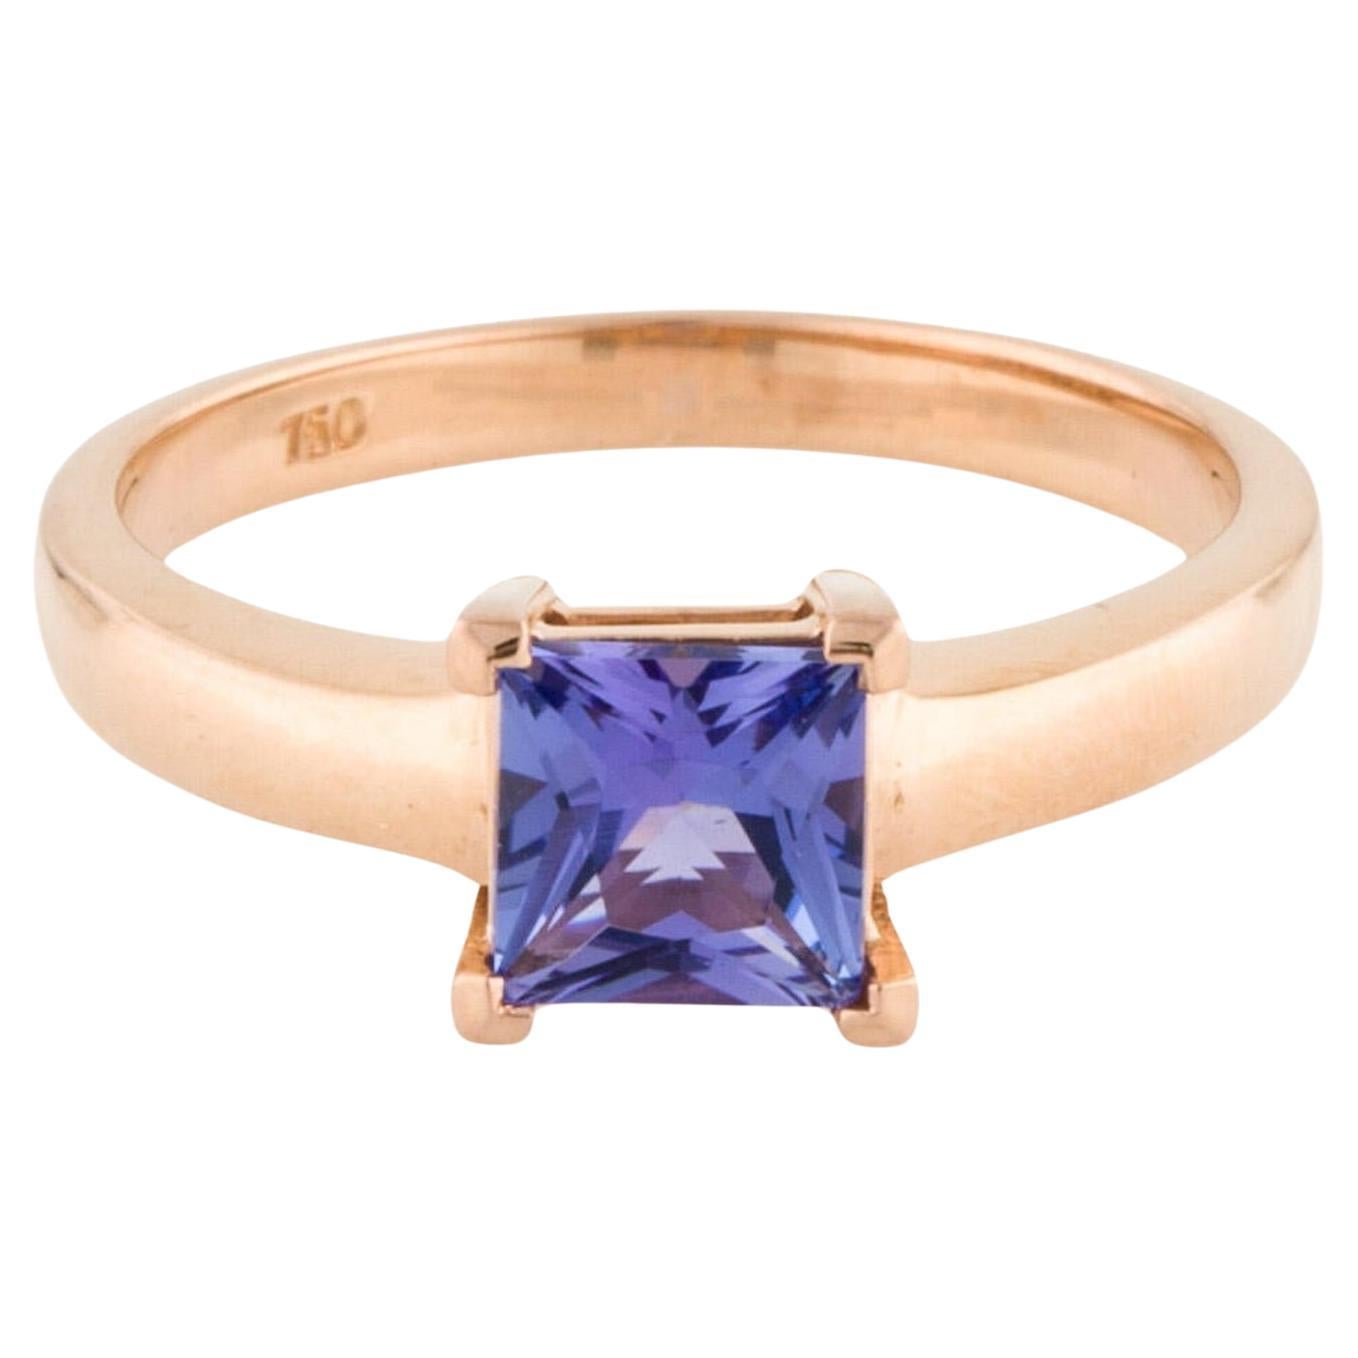 18K Tanzanite Cocktail Ring 2.50ctw - Size 7.75 - Exquisite Statement Jewelry